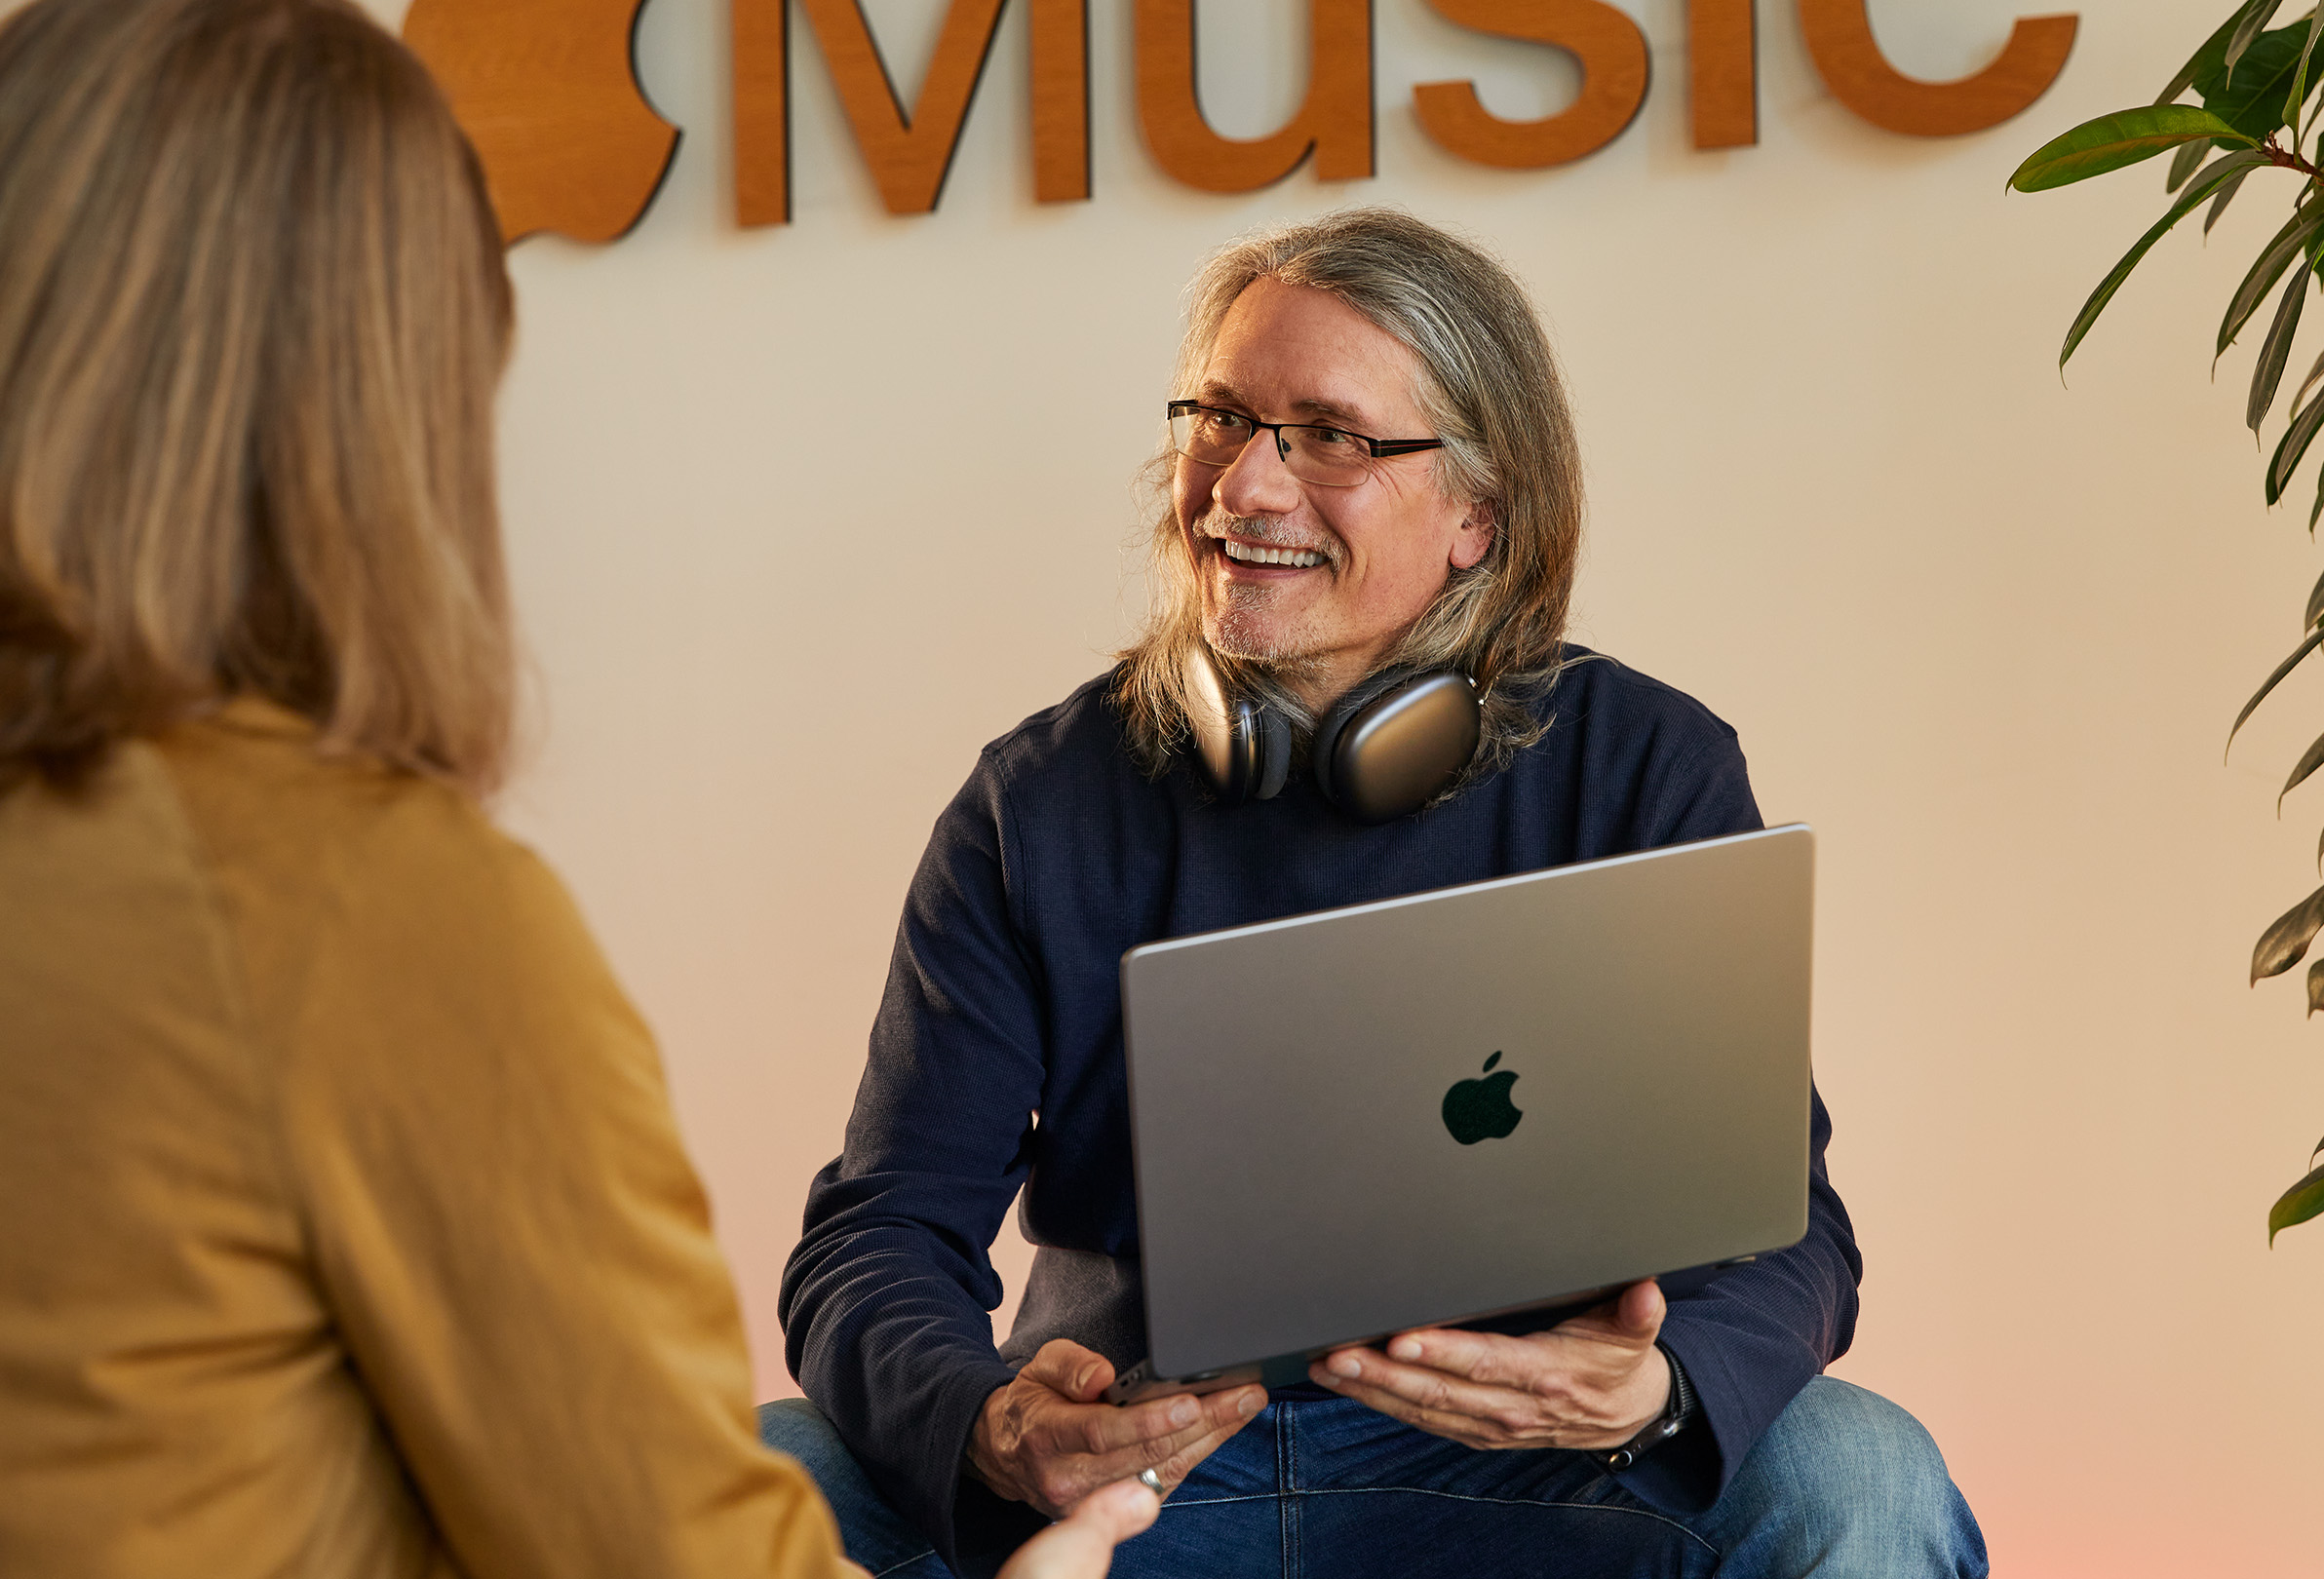 Two Apple employees in conversation, one holding a MacBook and sitting in front of a wall with the Apple Music logo on it.